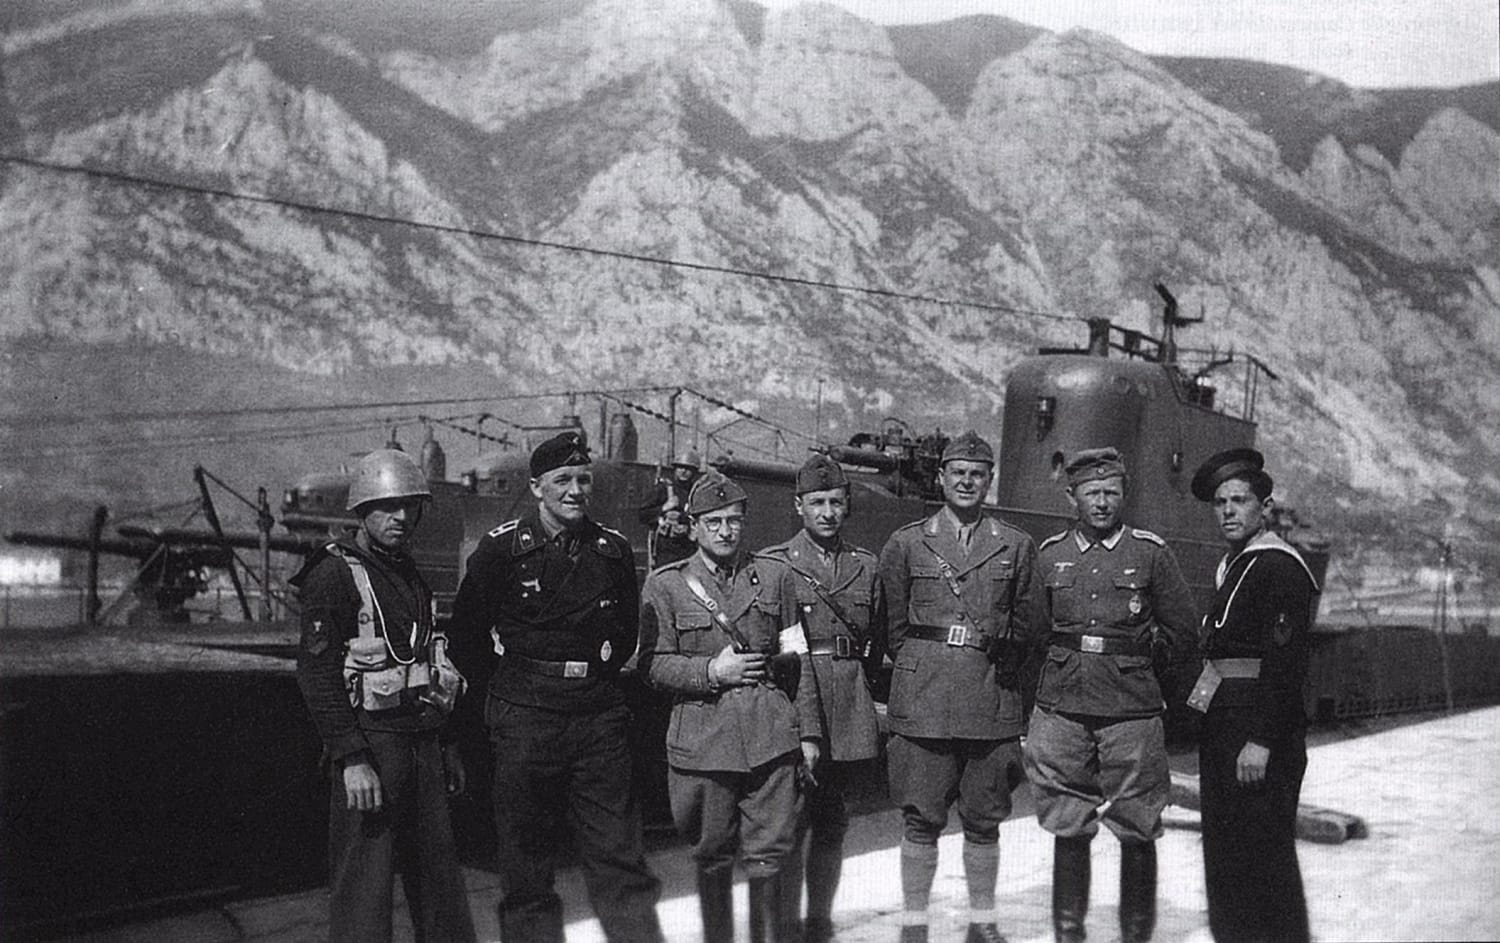 Italian and German soldiers and sailors standing in front of captured Yugoslav submarines (Hrabri in the foreground), Kotor, April 1941